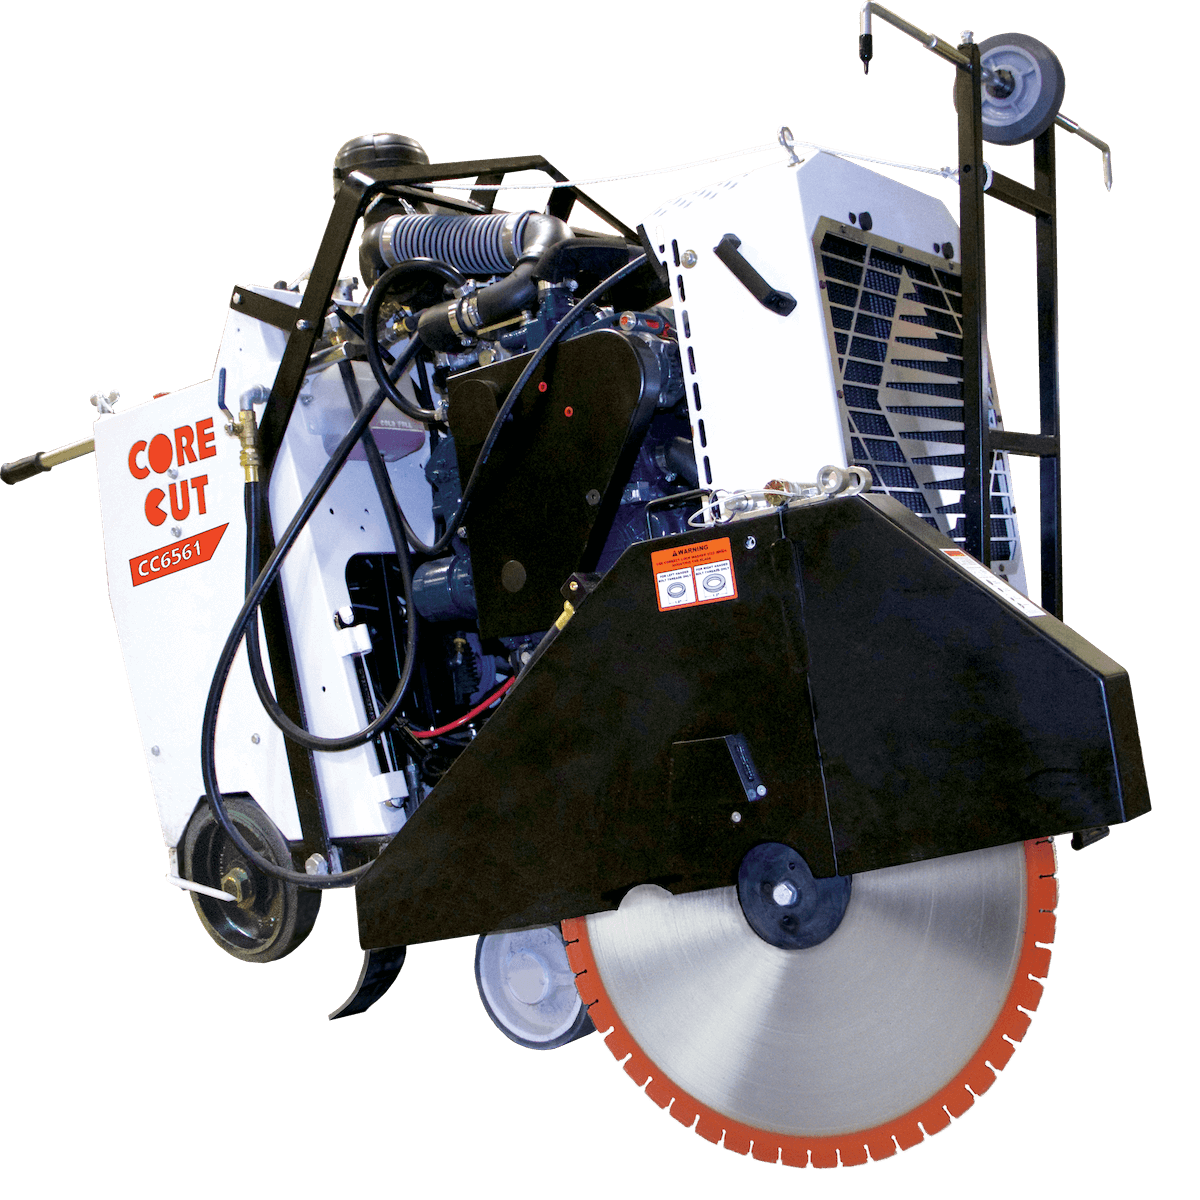 Core Cut Self-propelled saws